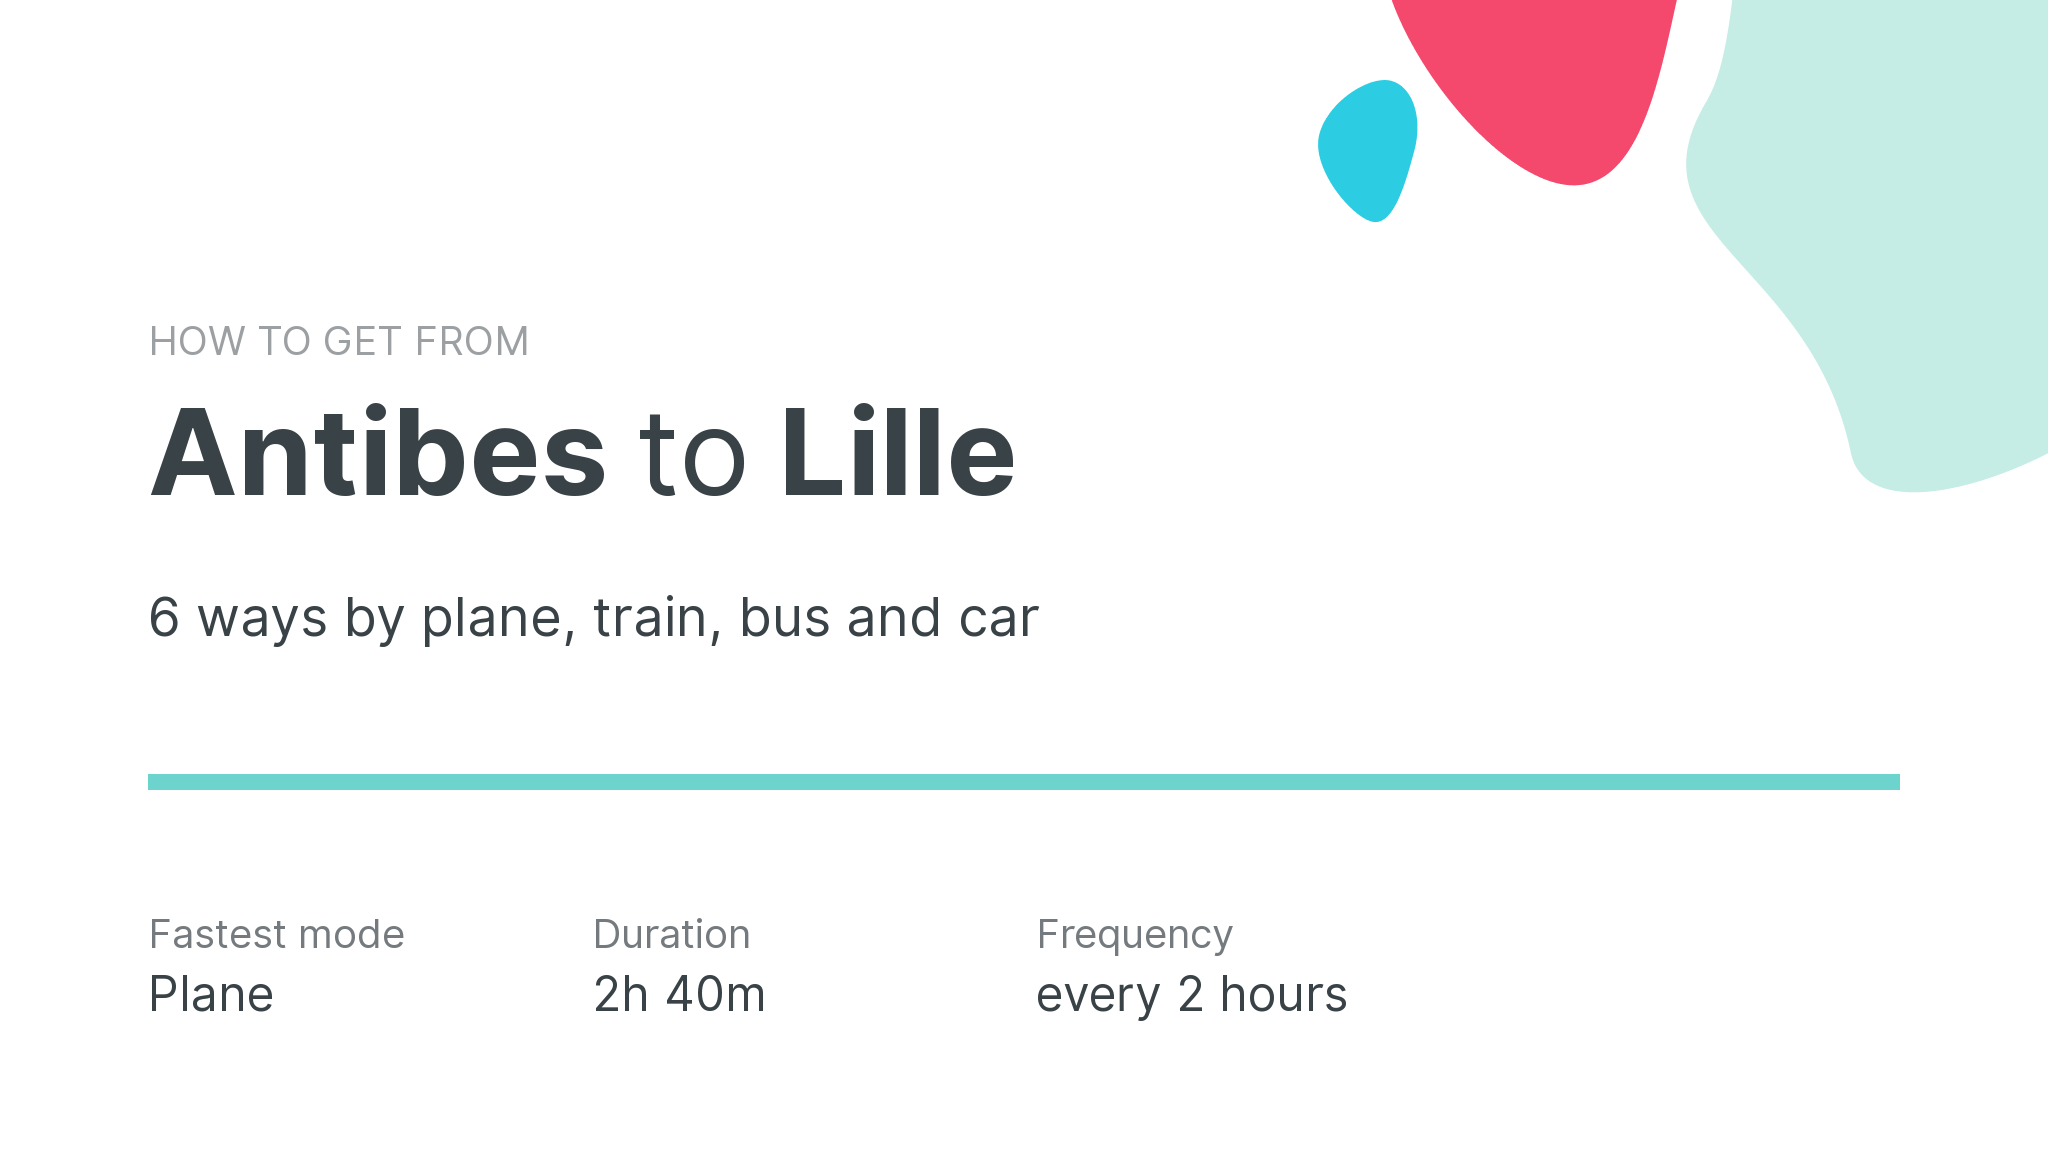 How do I get from Antibes to Lille